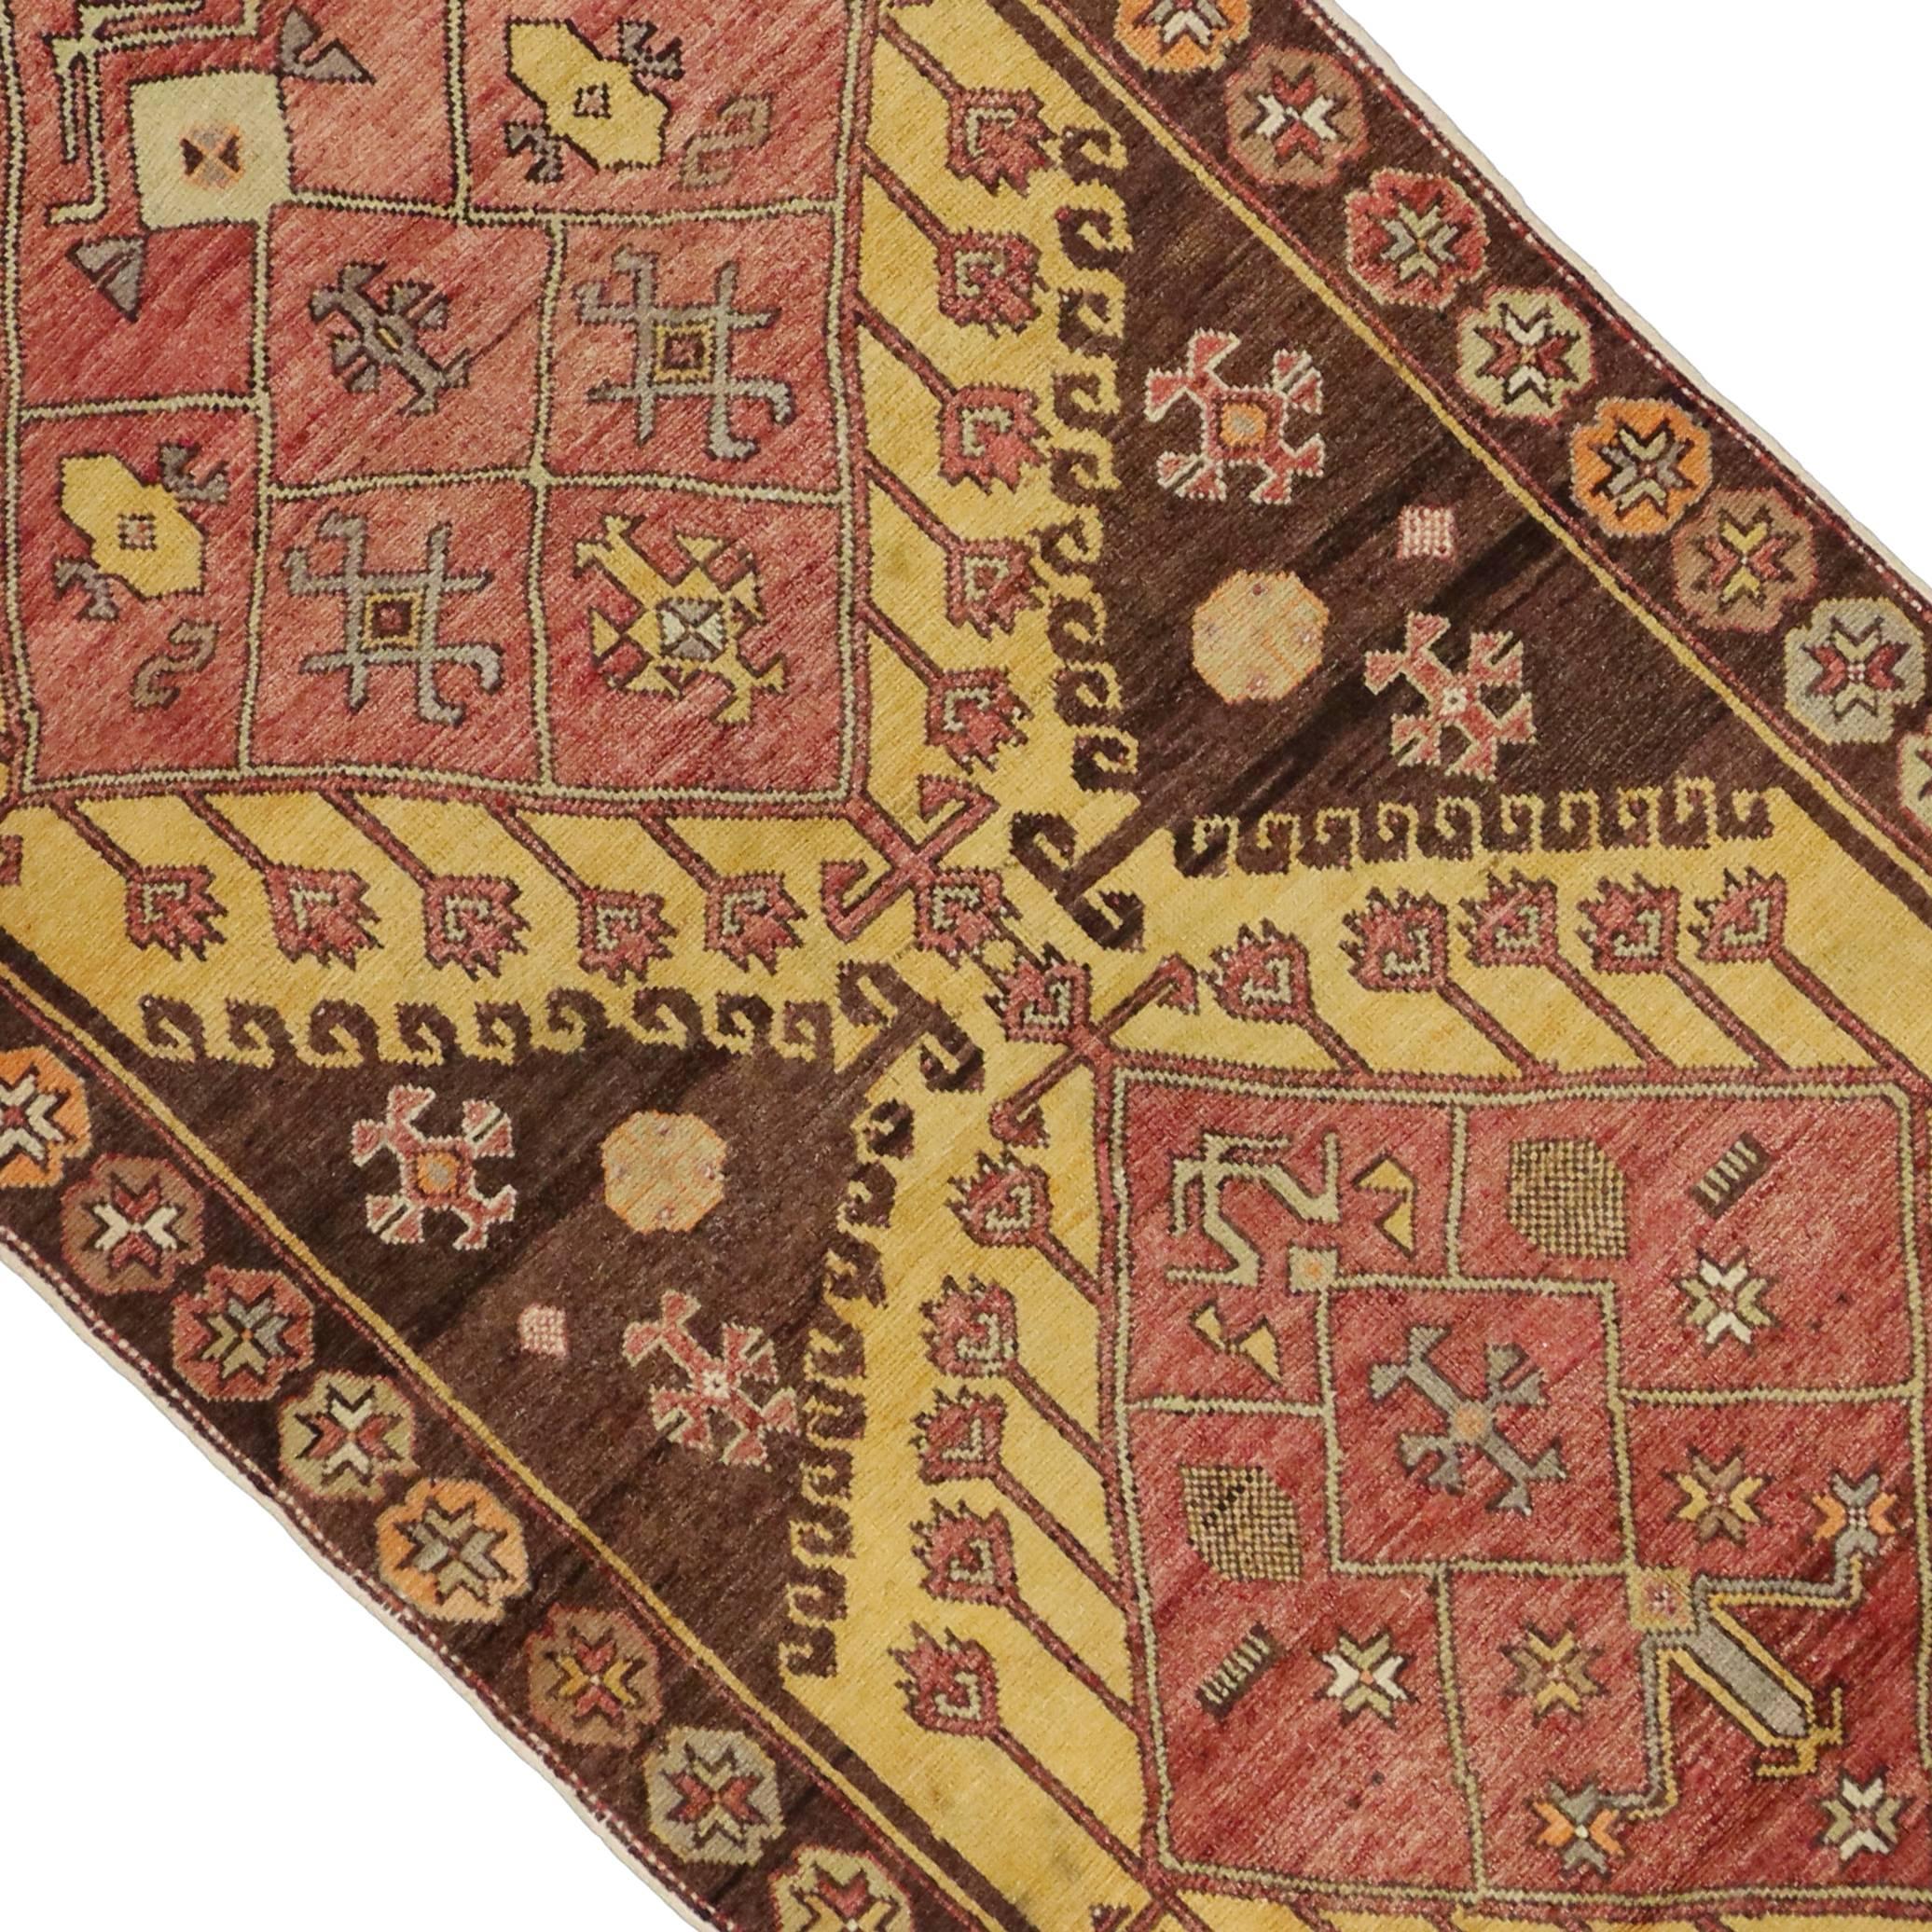 74046, vintage Turkish Oushak runner with tribal style, hallway runner. This hand-knotted wool vintage Turkish Oushak runner features a double amulet inspired by the Yomut (Yomud). The abrashed brick red diamond amulets are divided into compartments